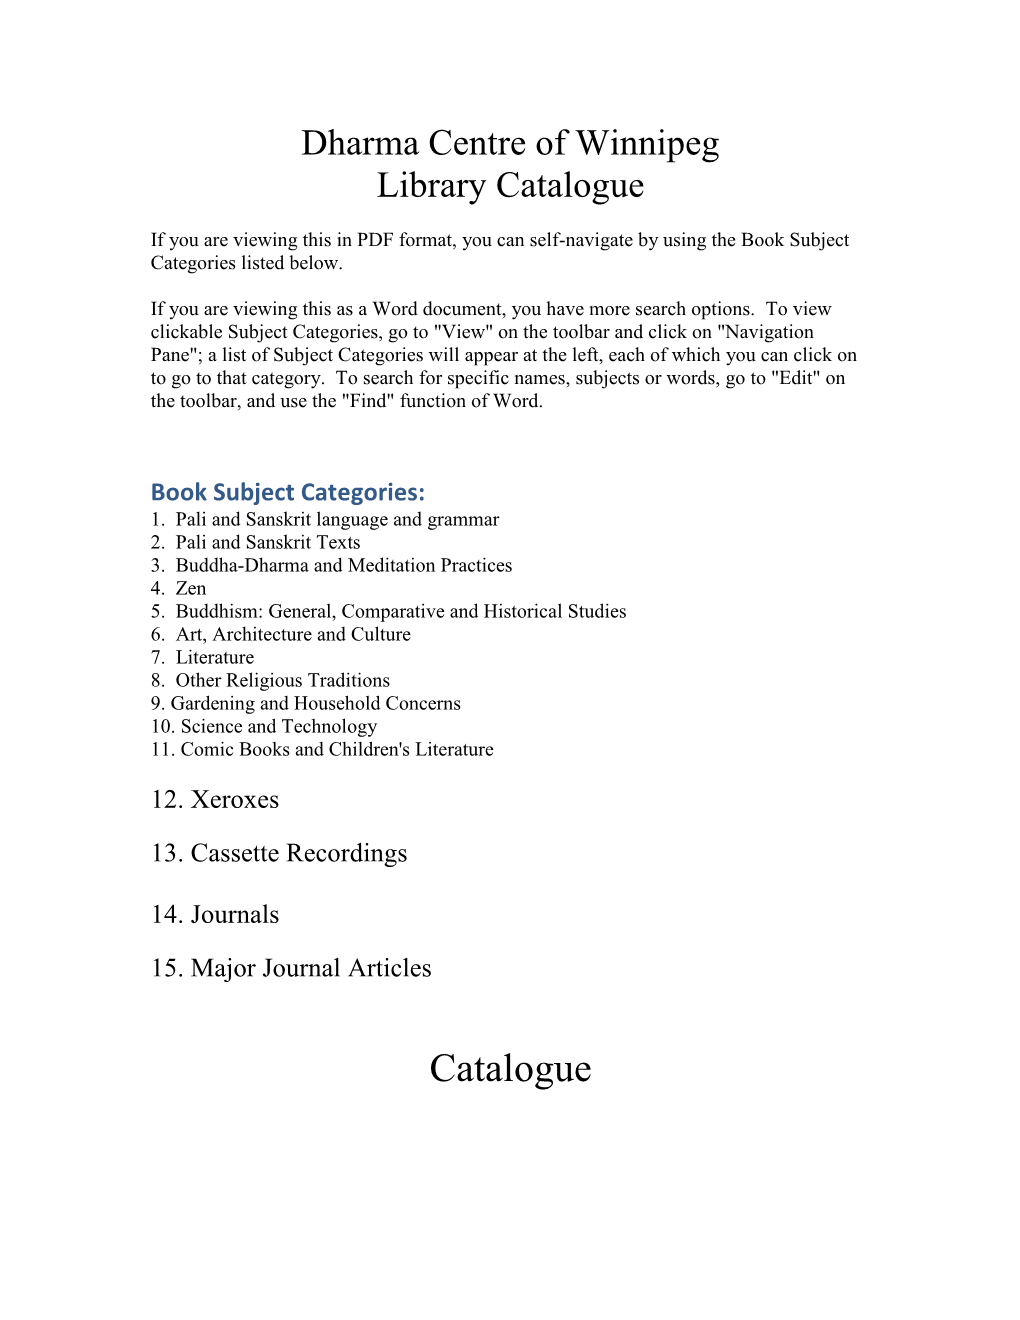 Download Our Library Catalogue